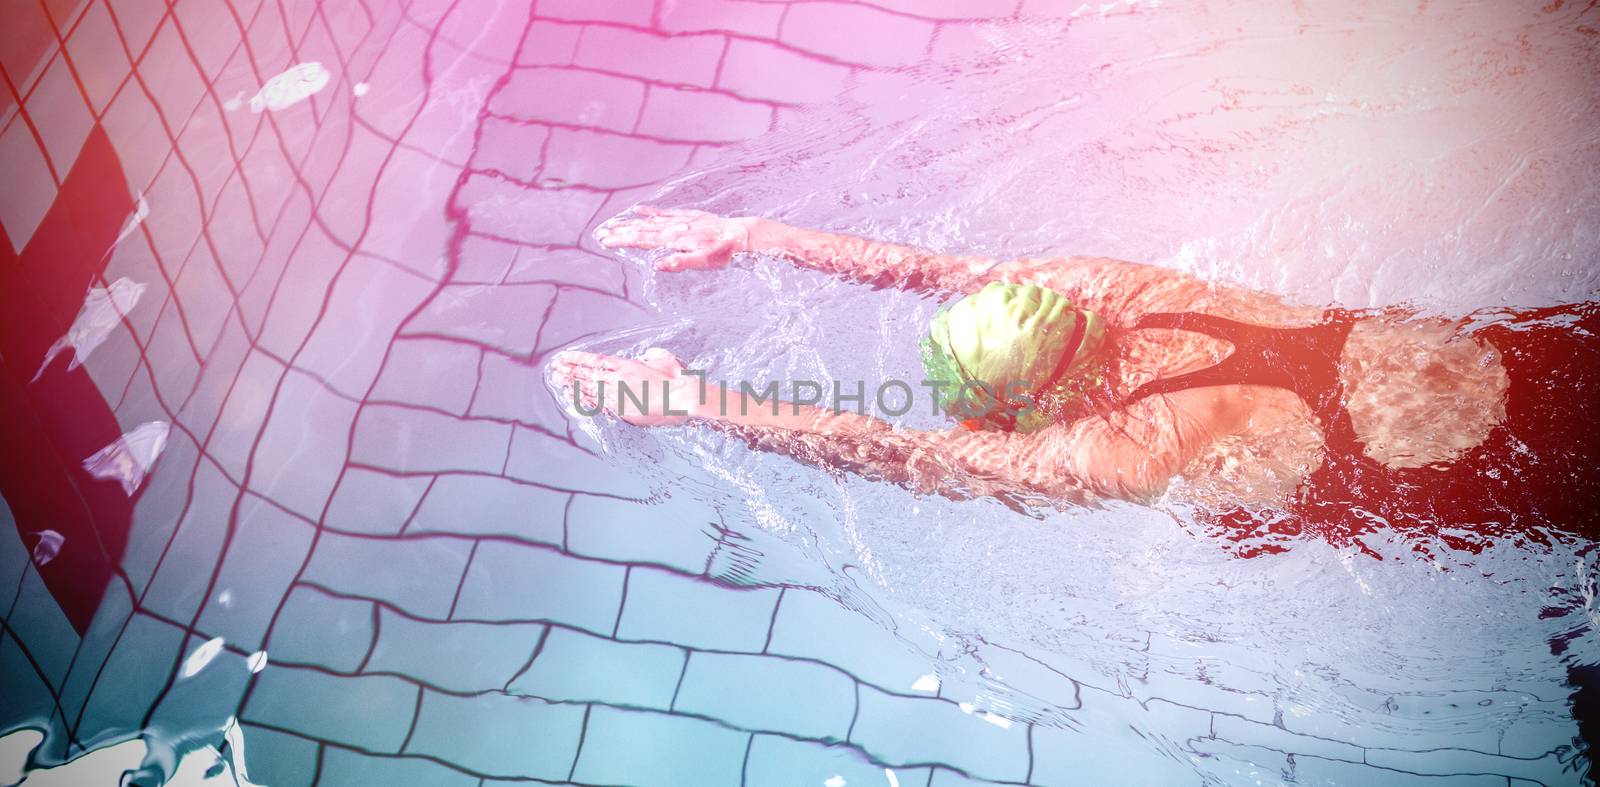 Fit woman swimming with swimming hat in swimming pool